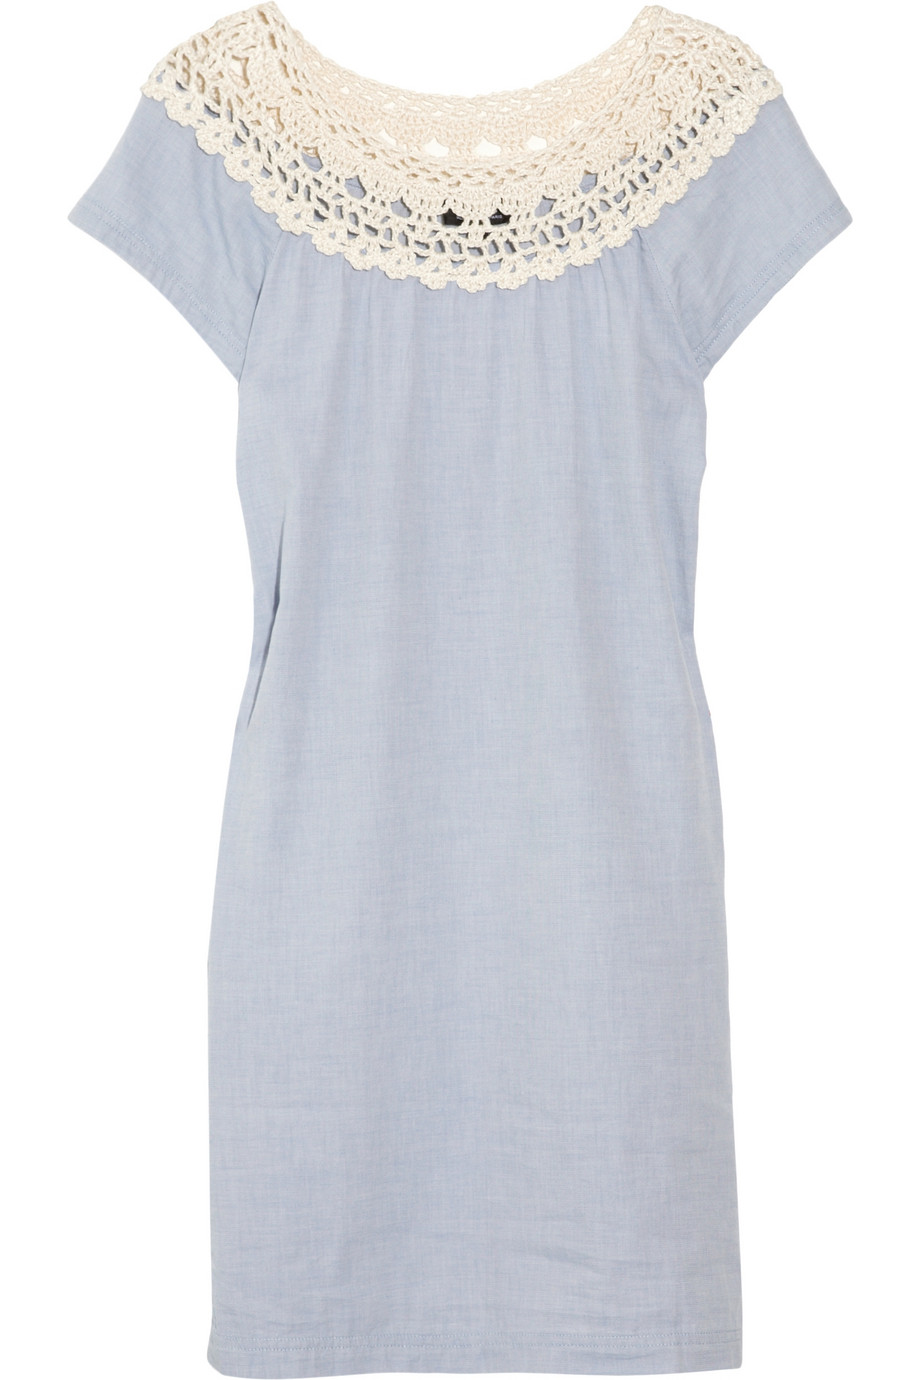 A.p.c. Crocheted Neck Cotton Chambray Dress in Blue | Lyst